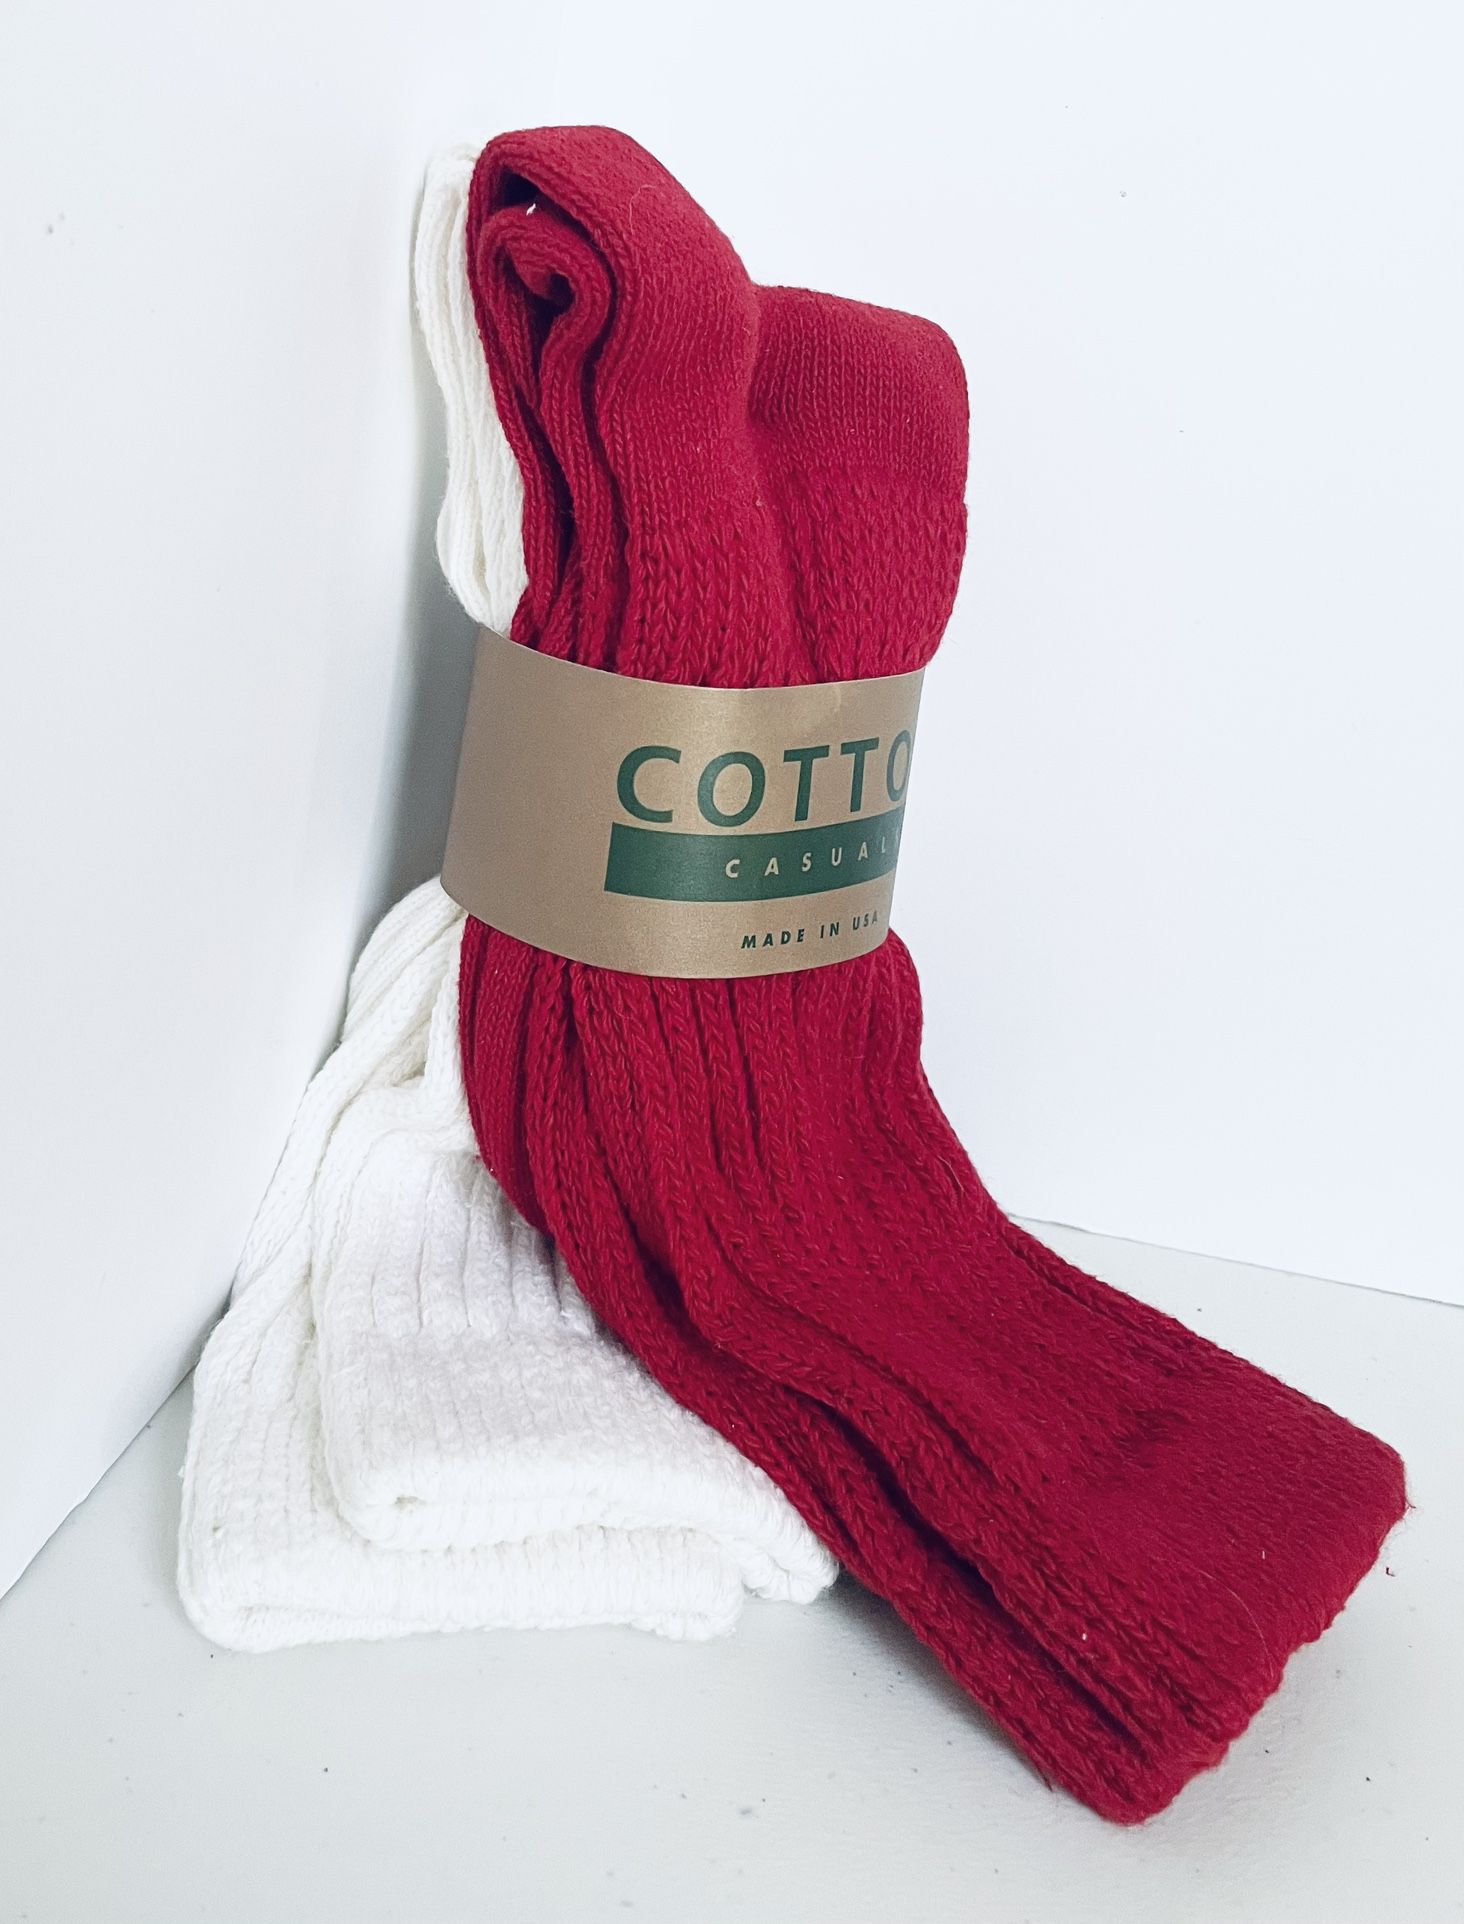 Cotton Casuals Socks, 2 Pair, Size 9-11, NWT